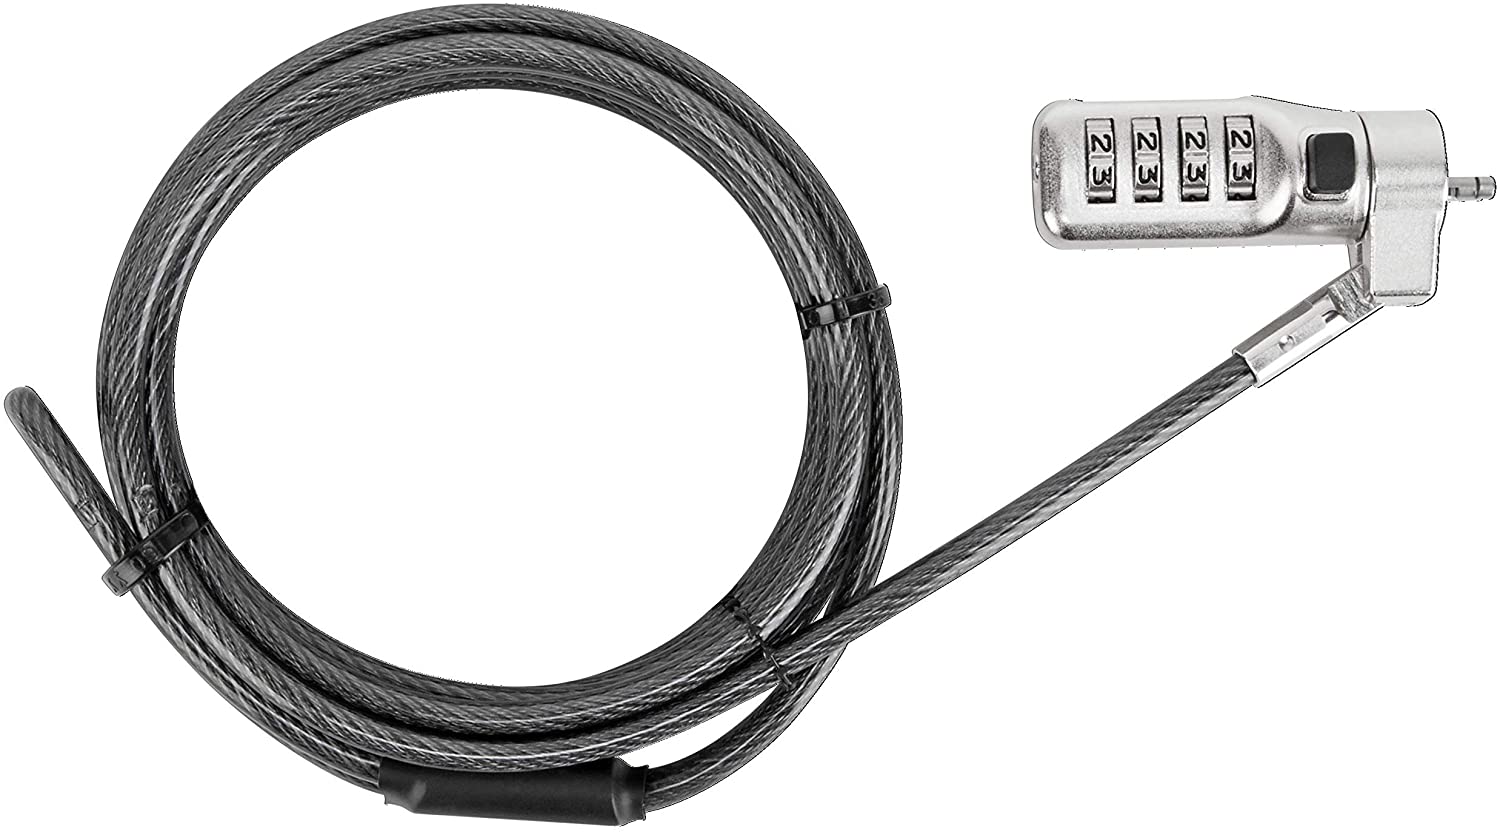 Kensington Master Lock Cable Black Universal Notebook Security Laptop Computers - image 3 of 5